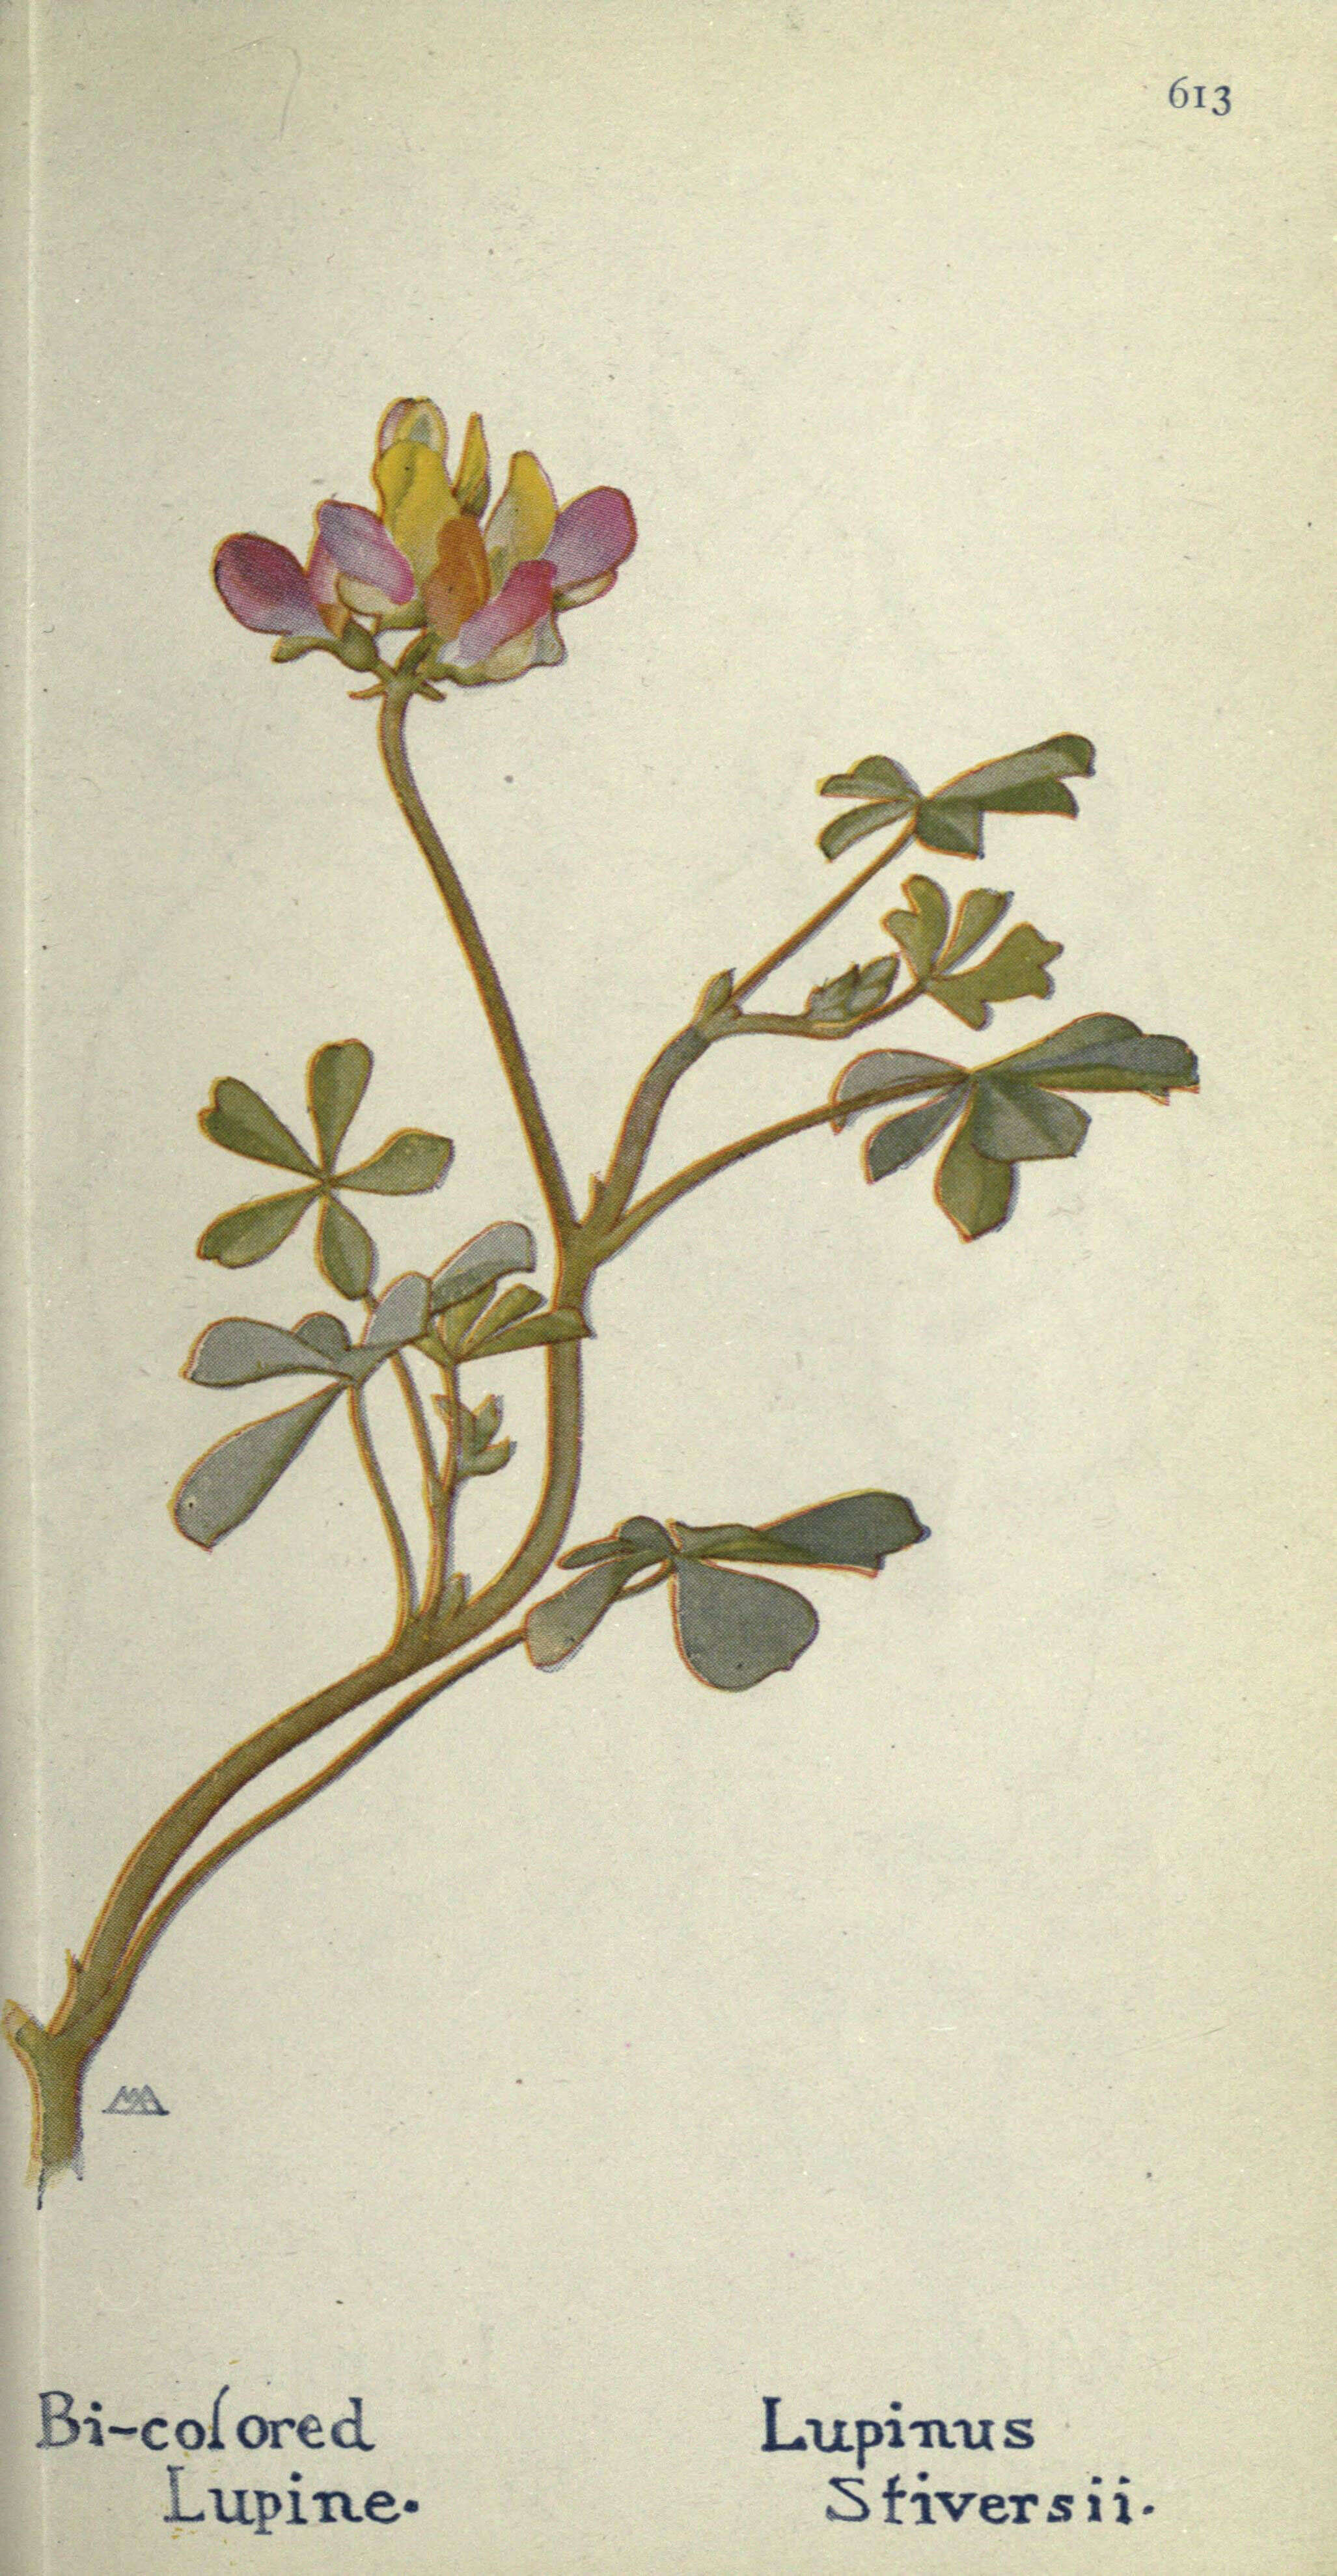 Image of harlequin annual lupine